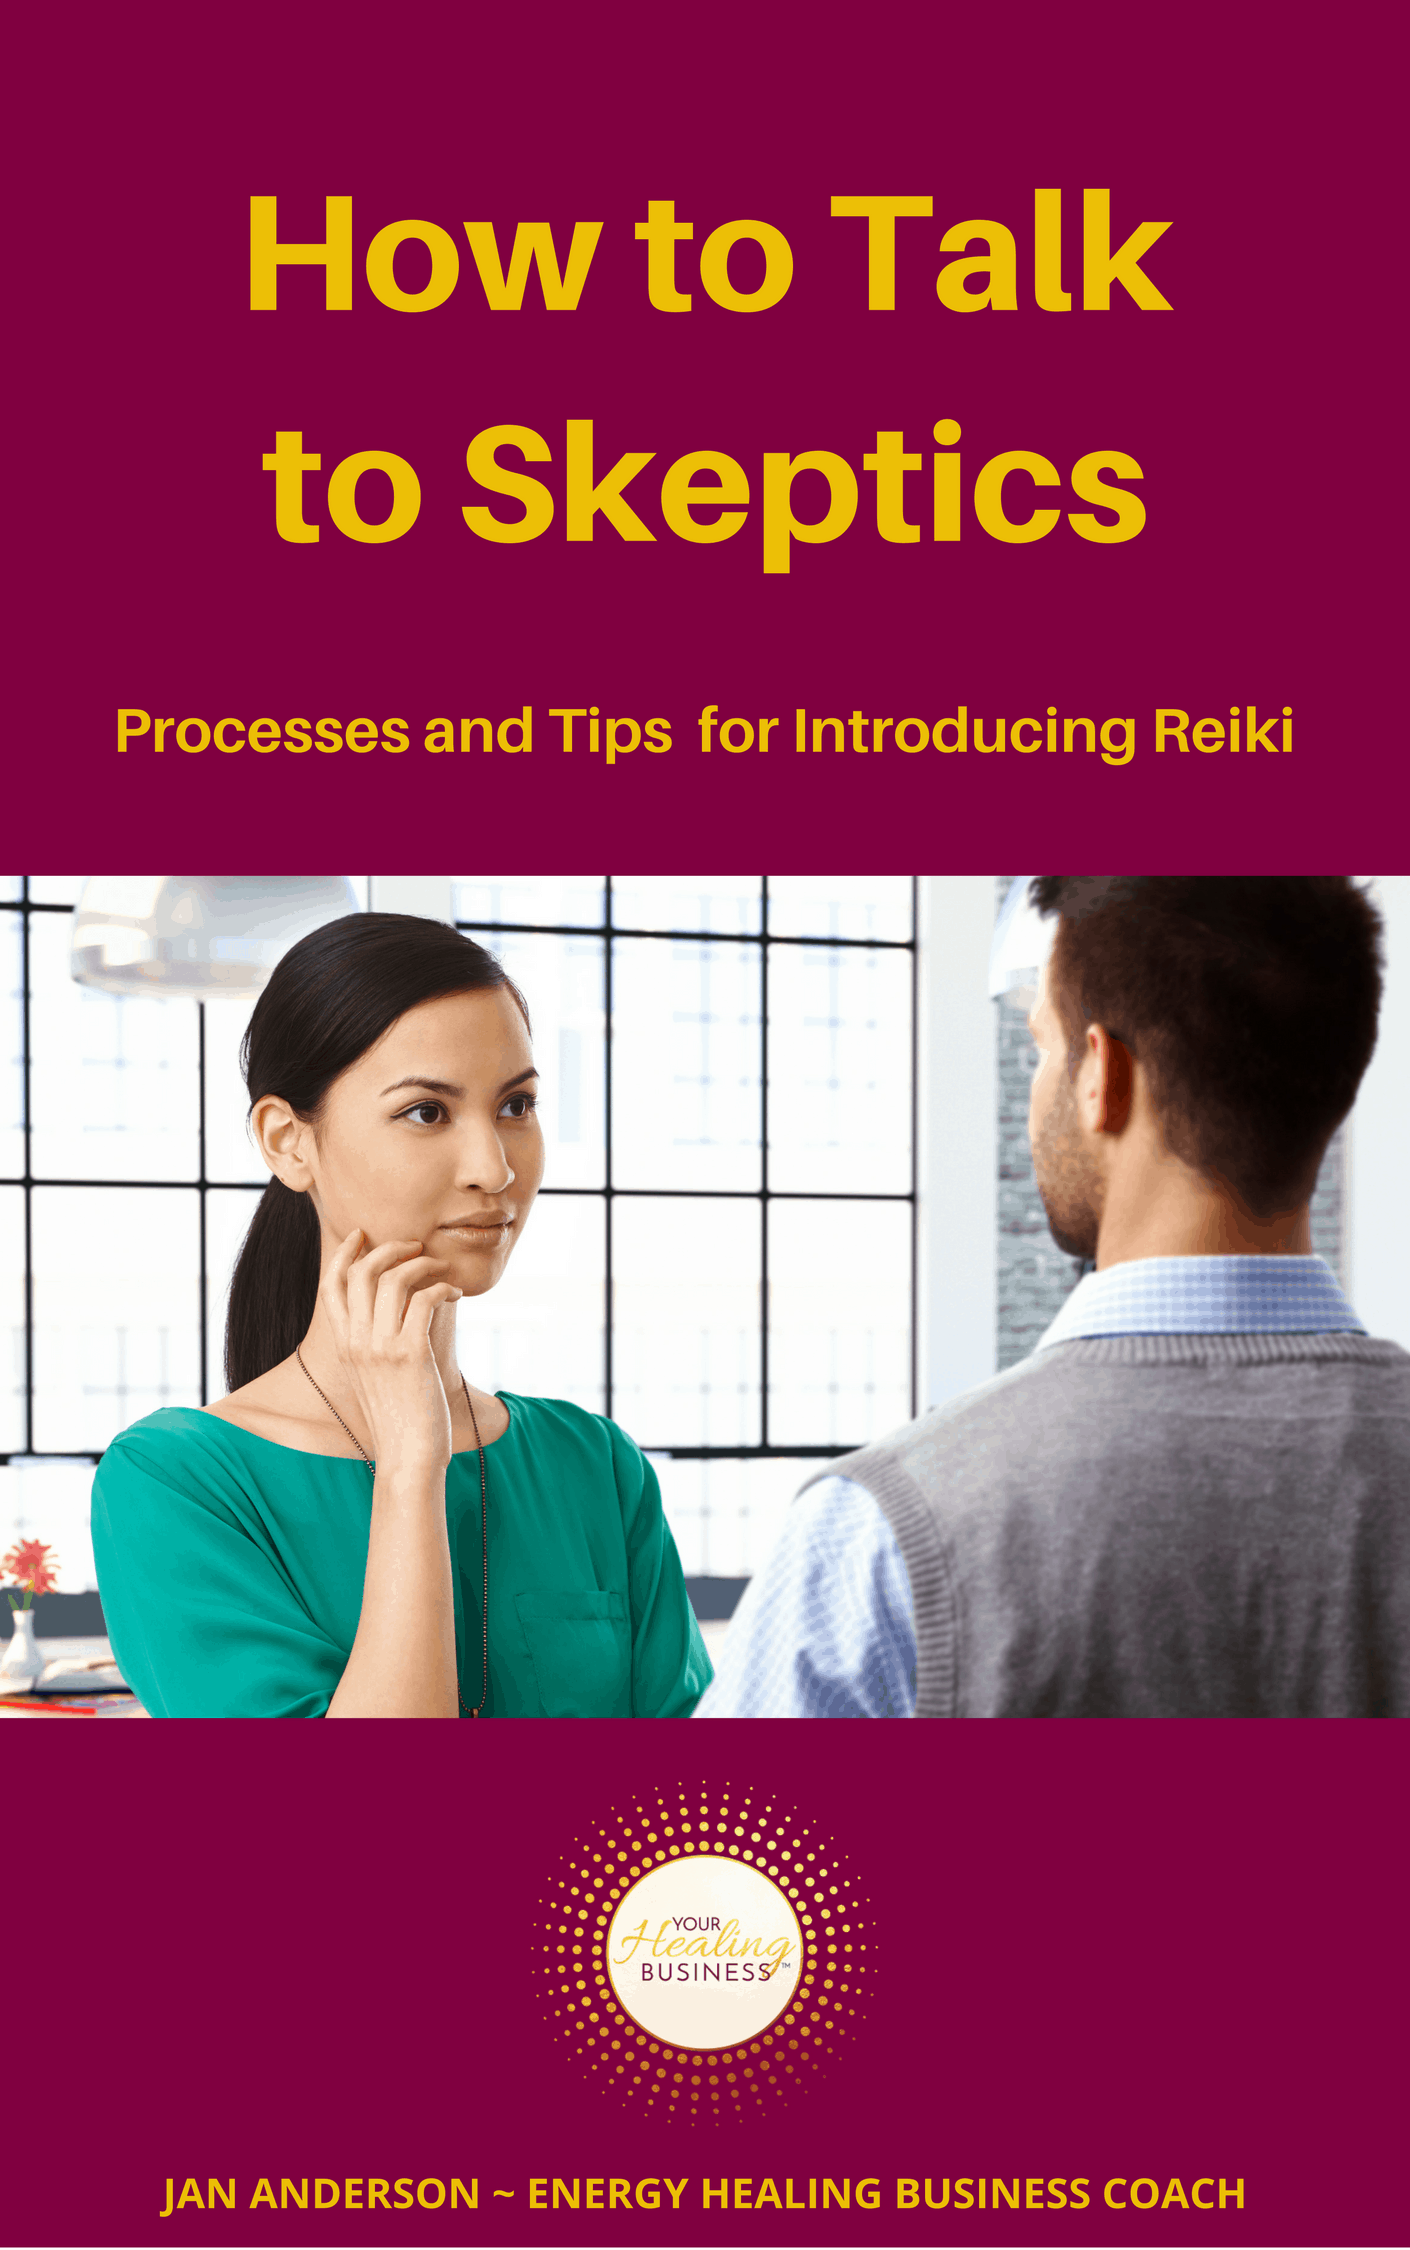 How to Talk to Skeptics